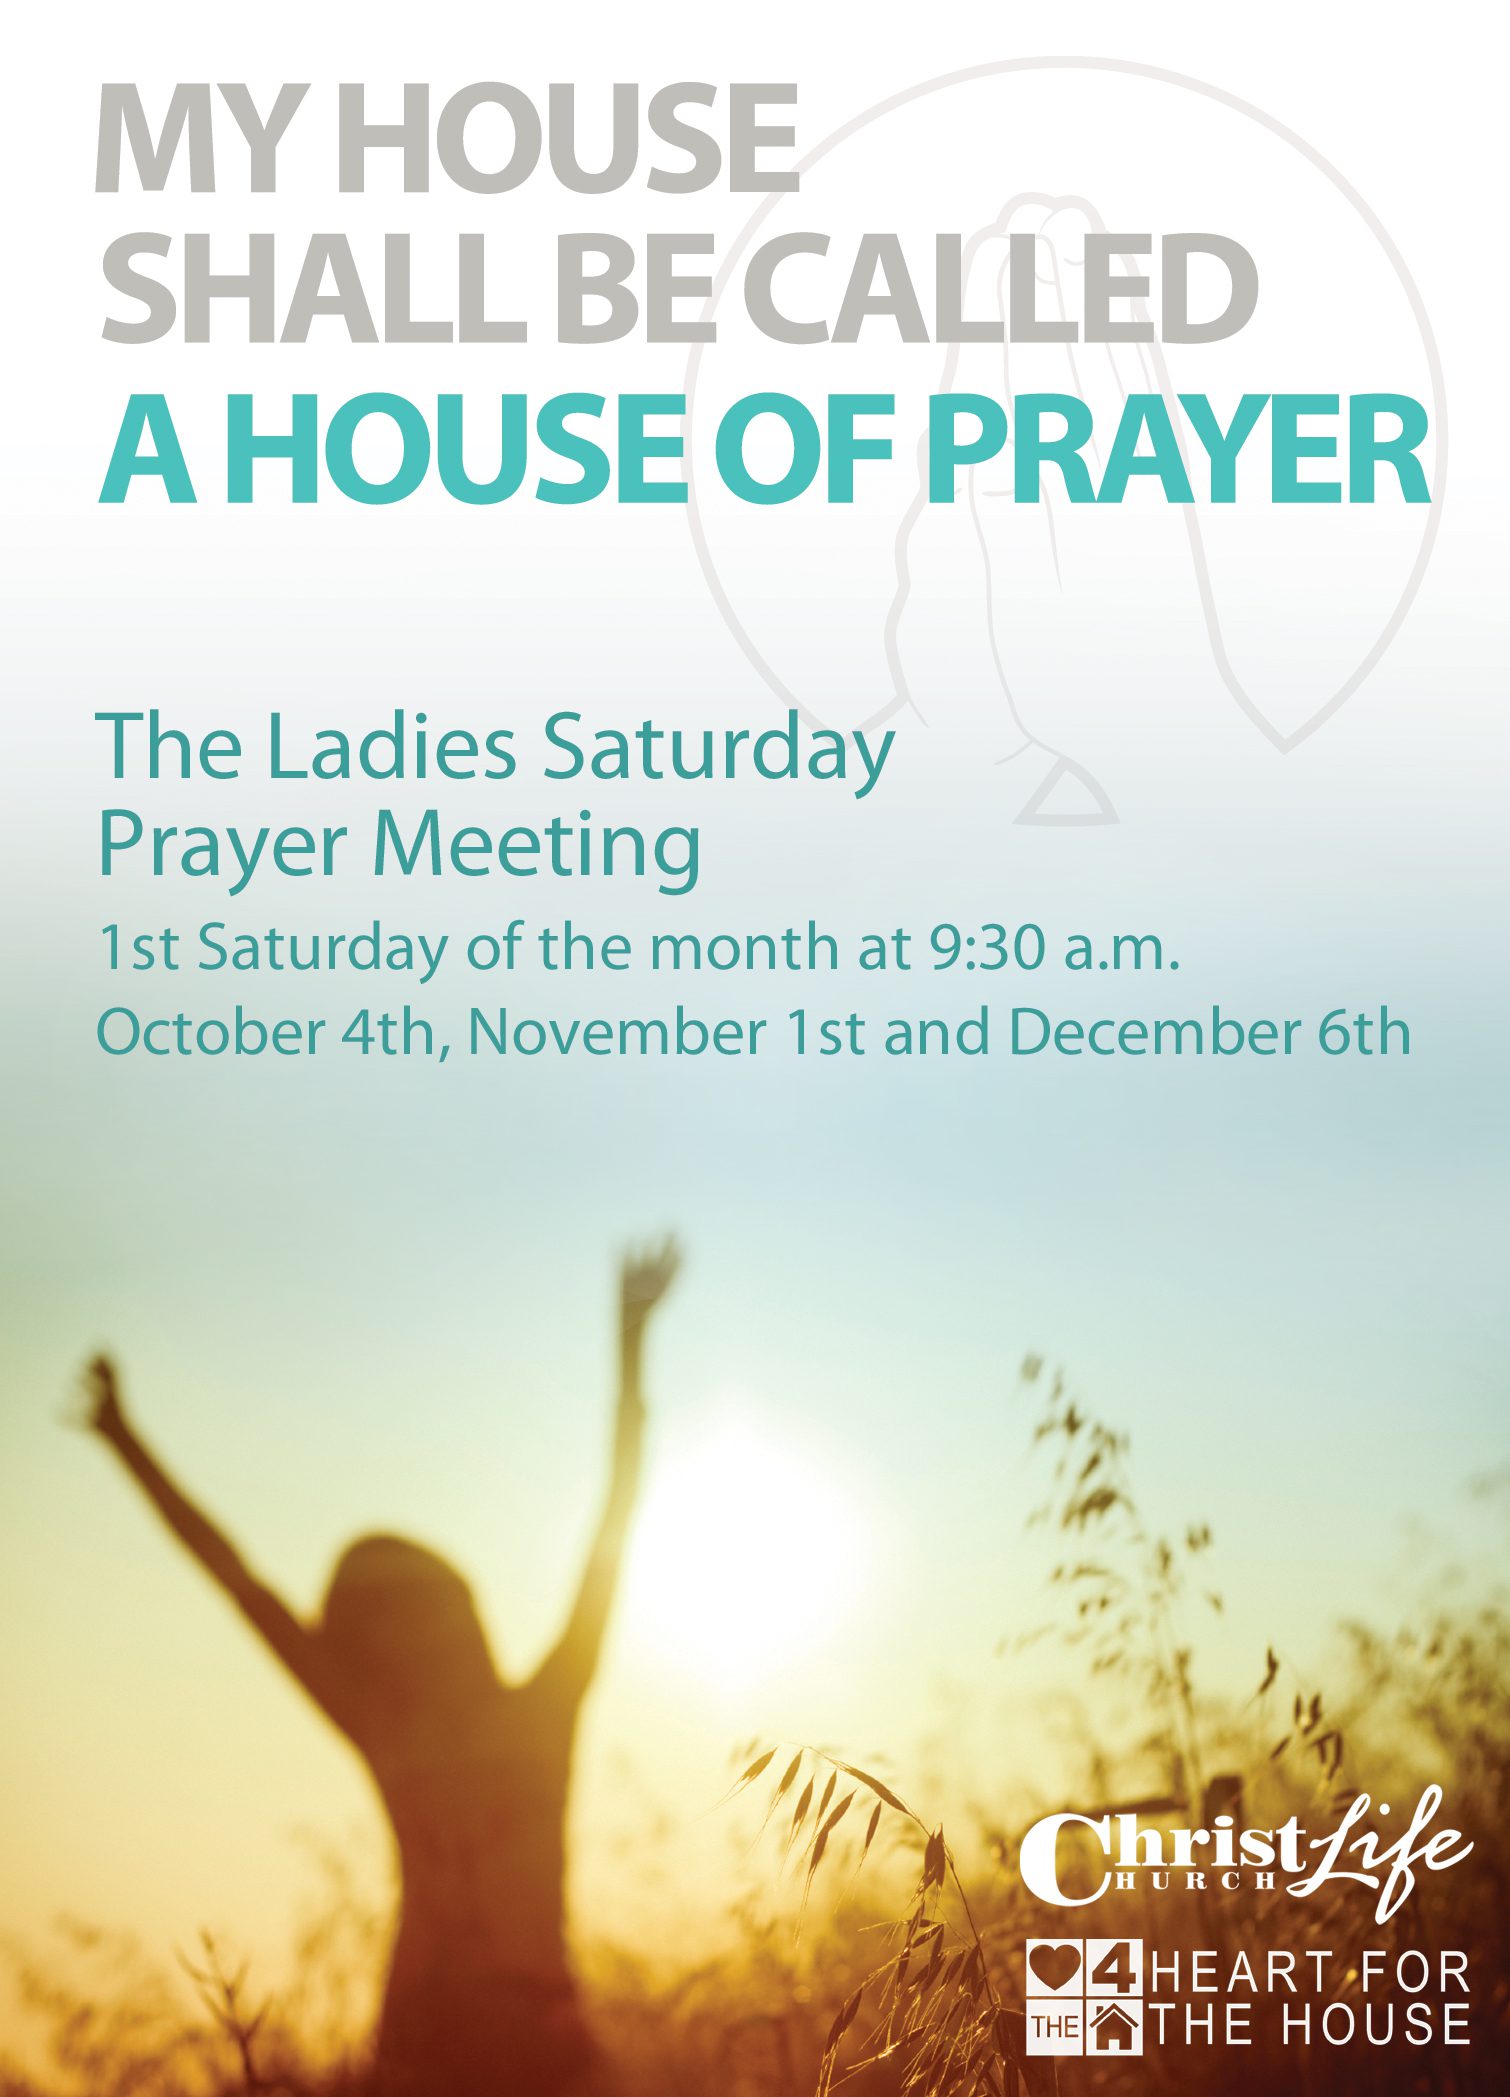 Prayer Meeting Flyer Designs | Graphic Design | Graphic, Print, Logo, and Website Design Solutions serving locally for Tempe Arizona and Phoenix Valley Cities